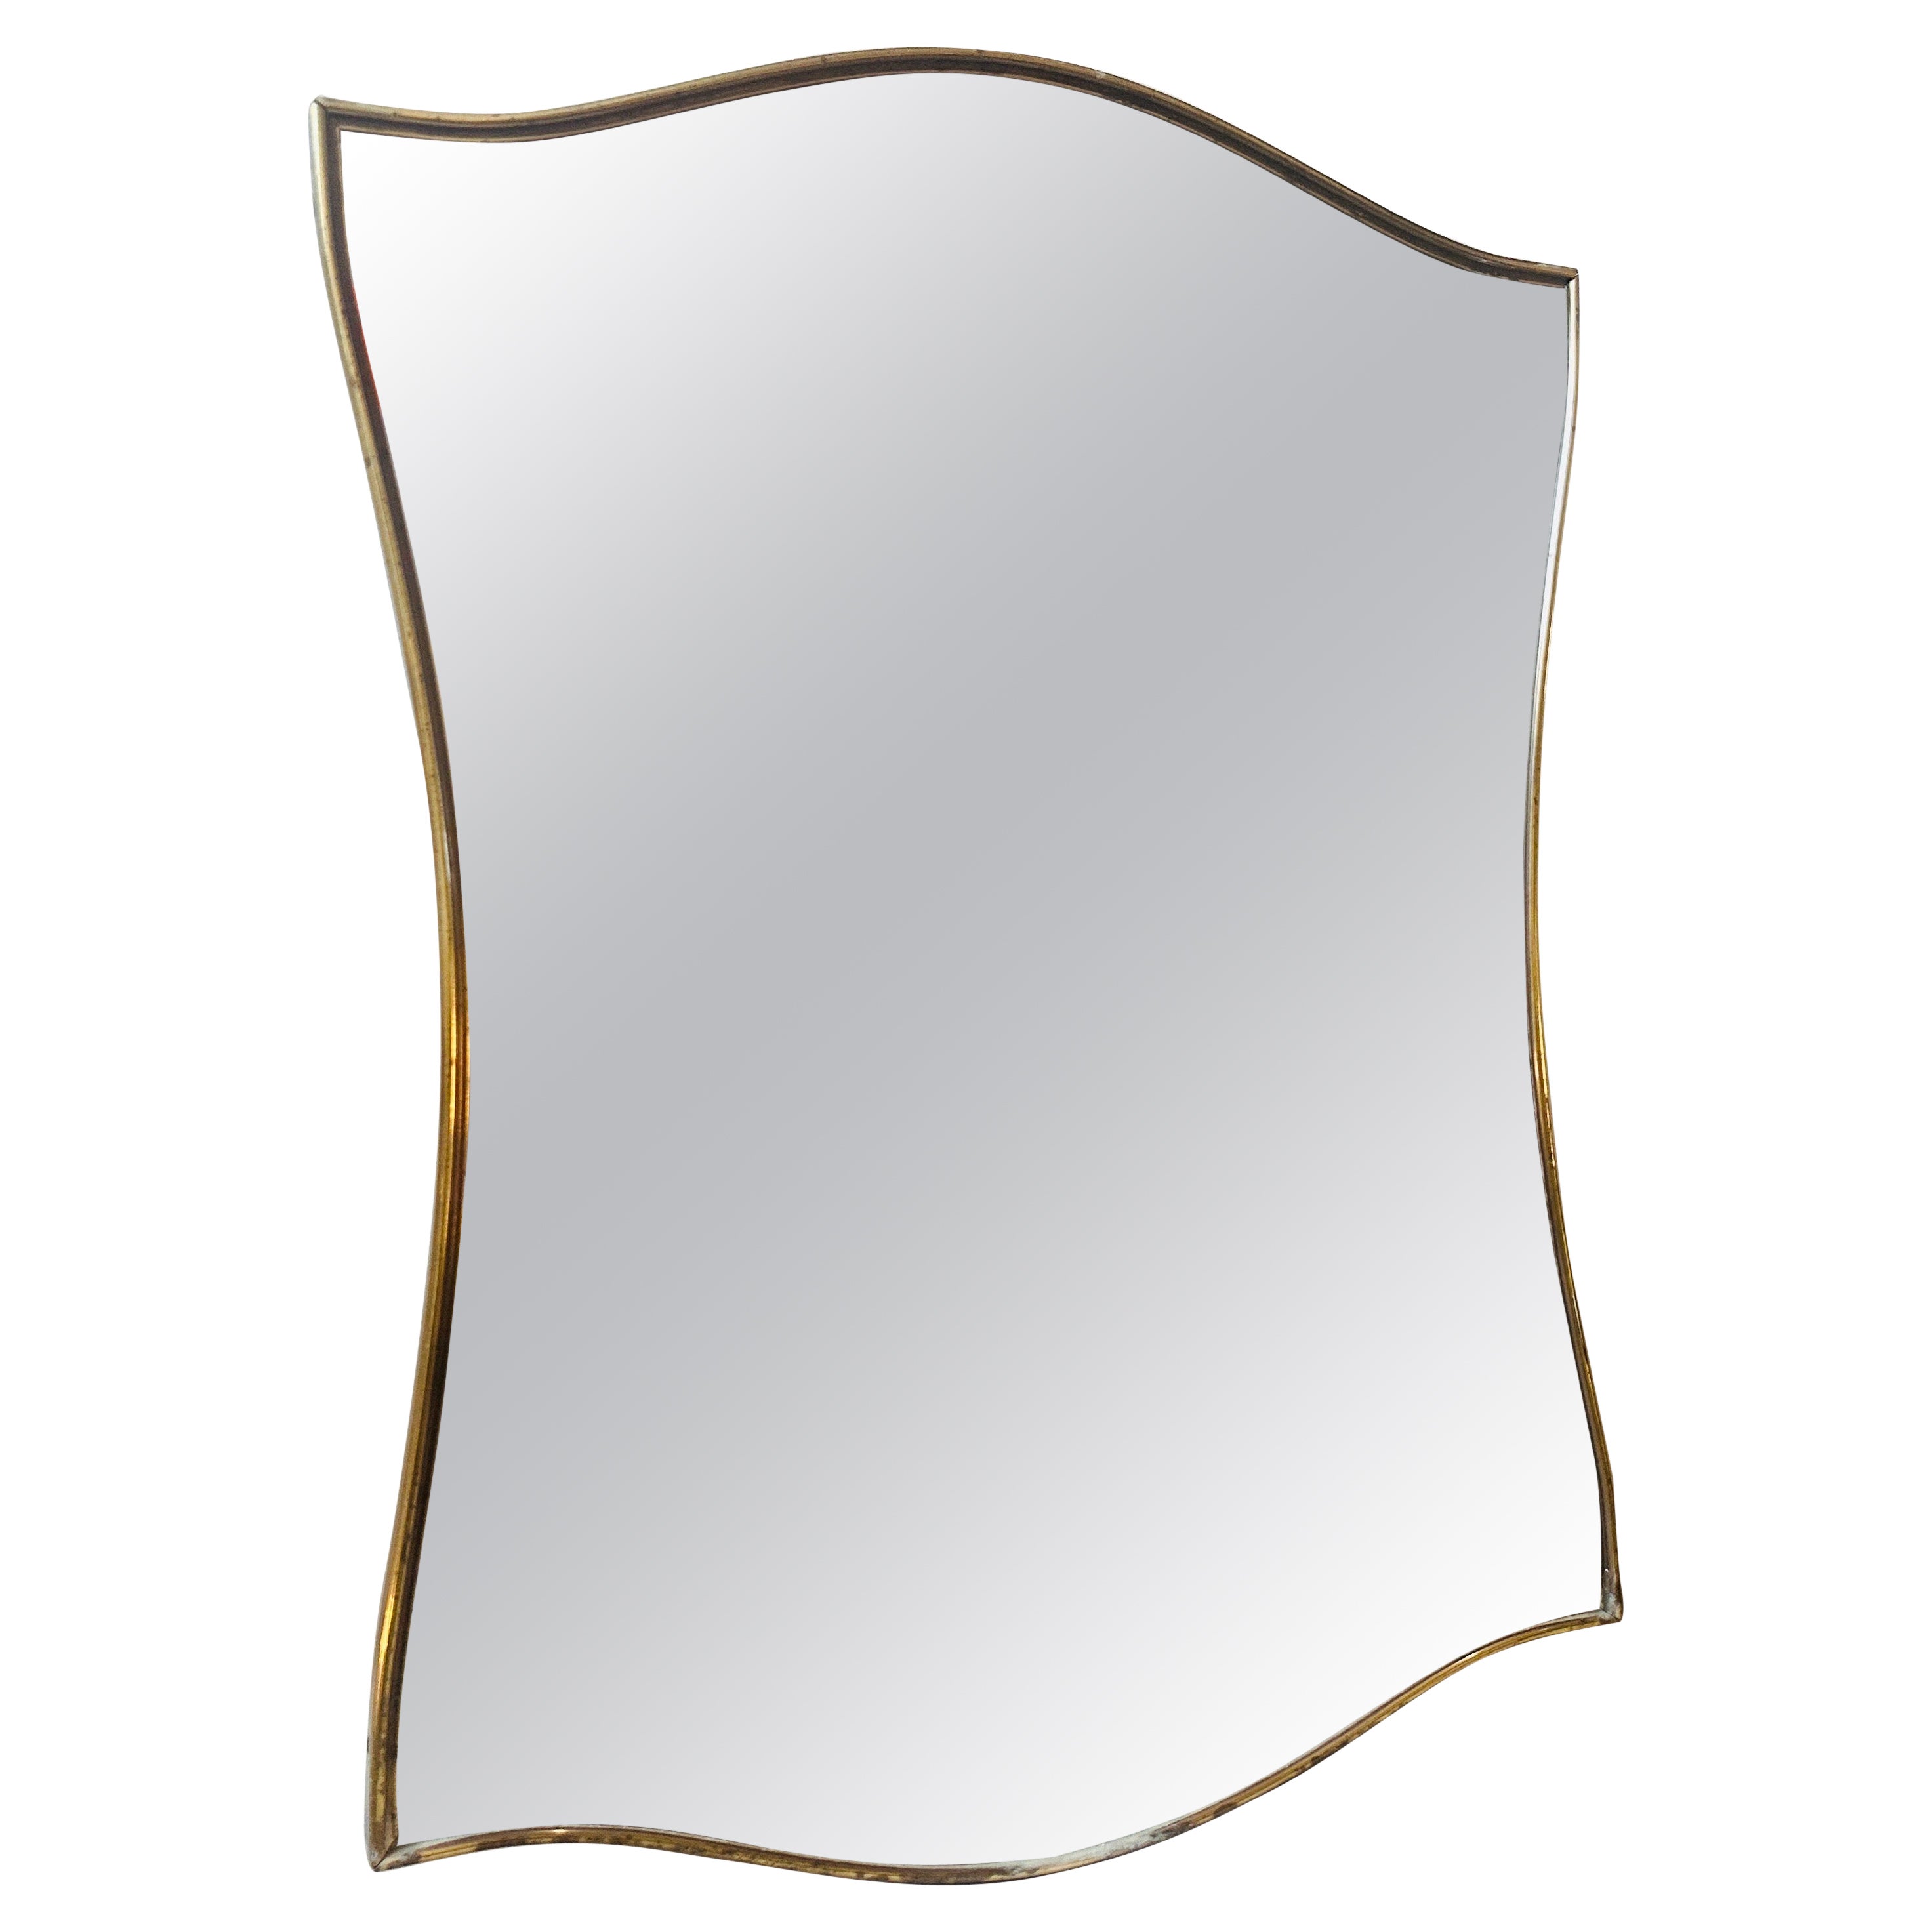 1960s Mid-century Modern Brass Italian Wall mirror in the manner of Gio Ponti For Sale